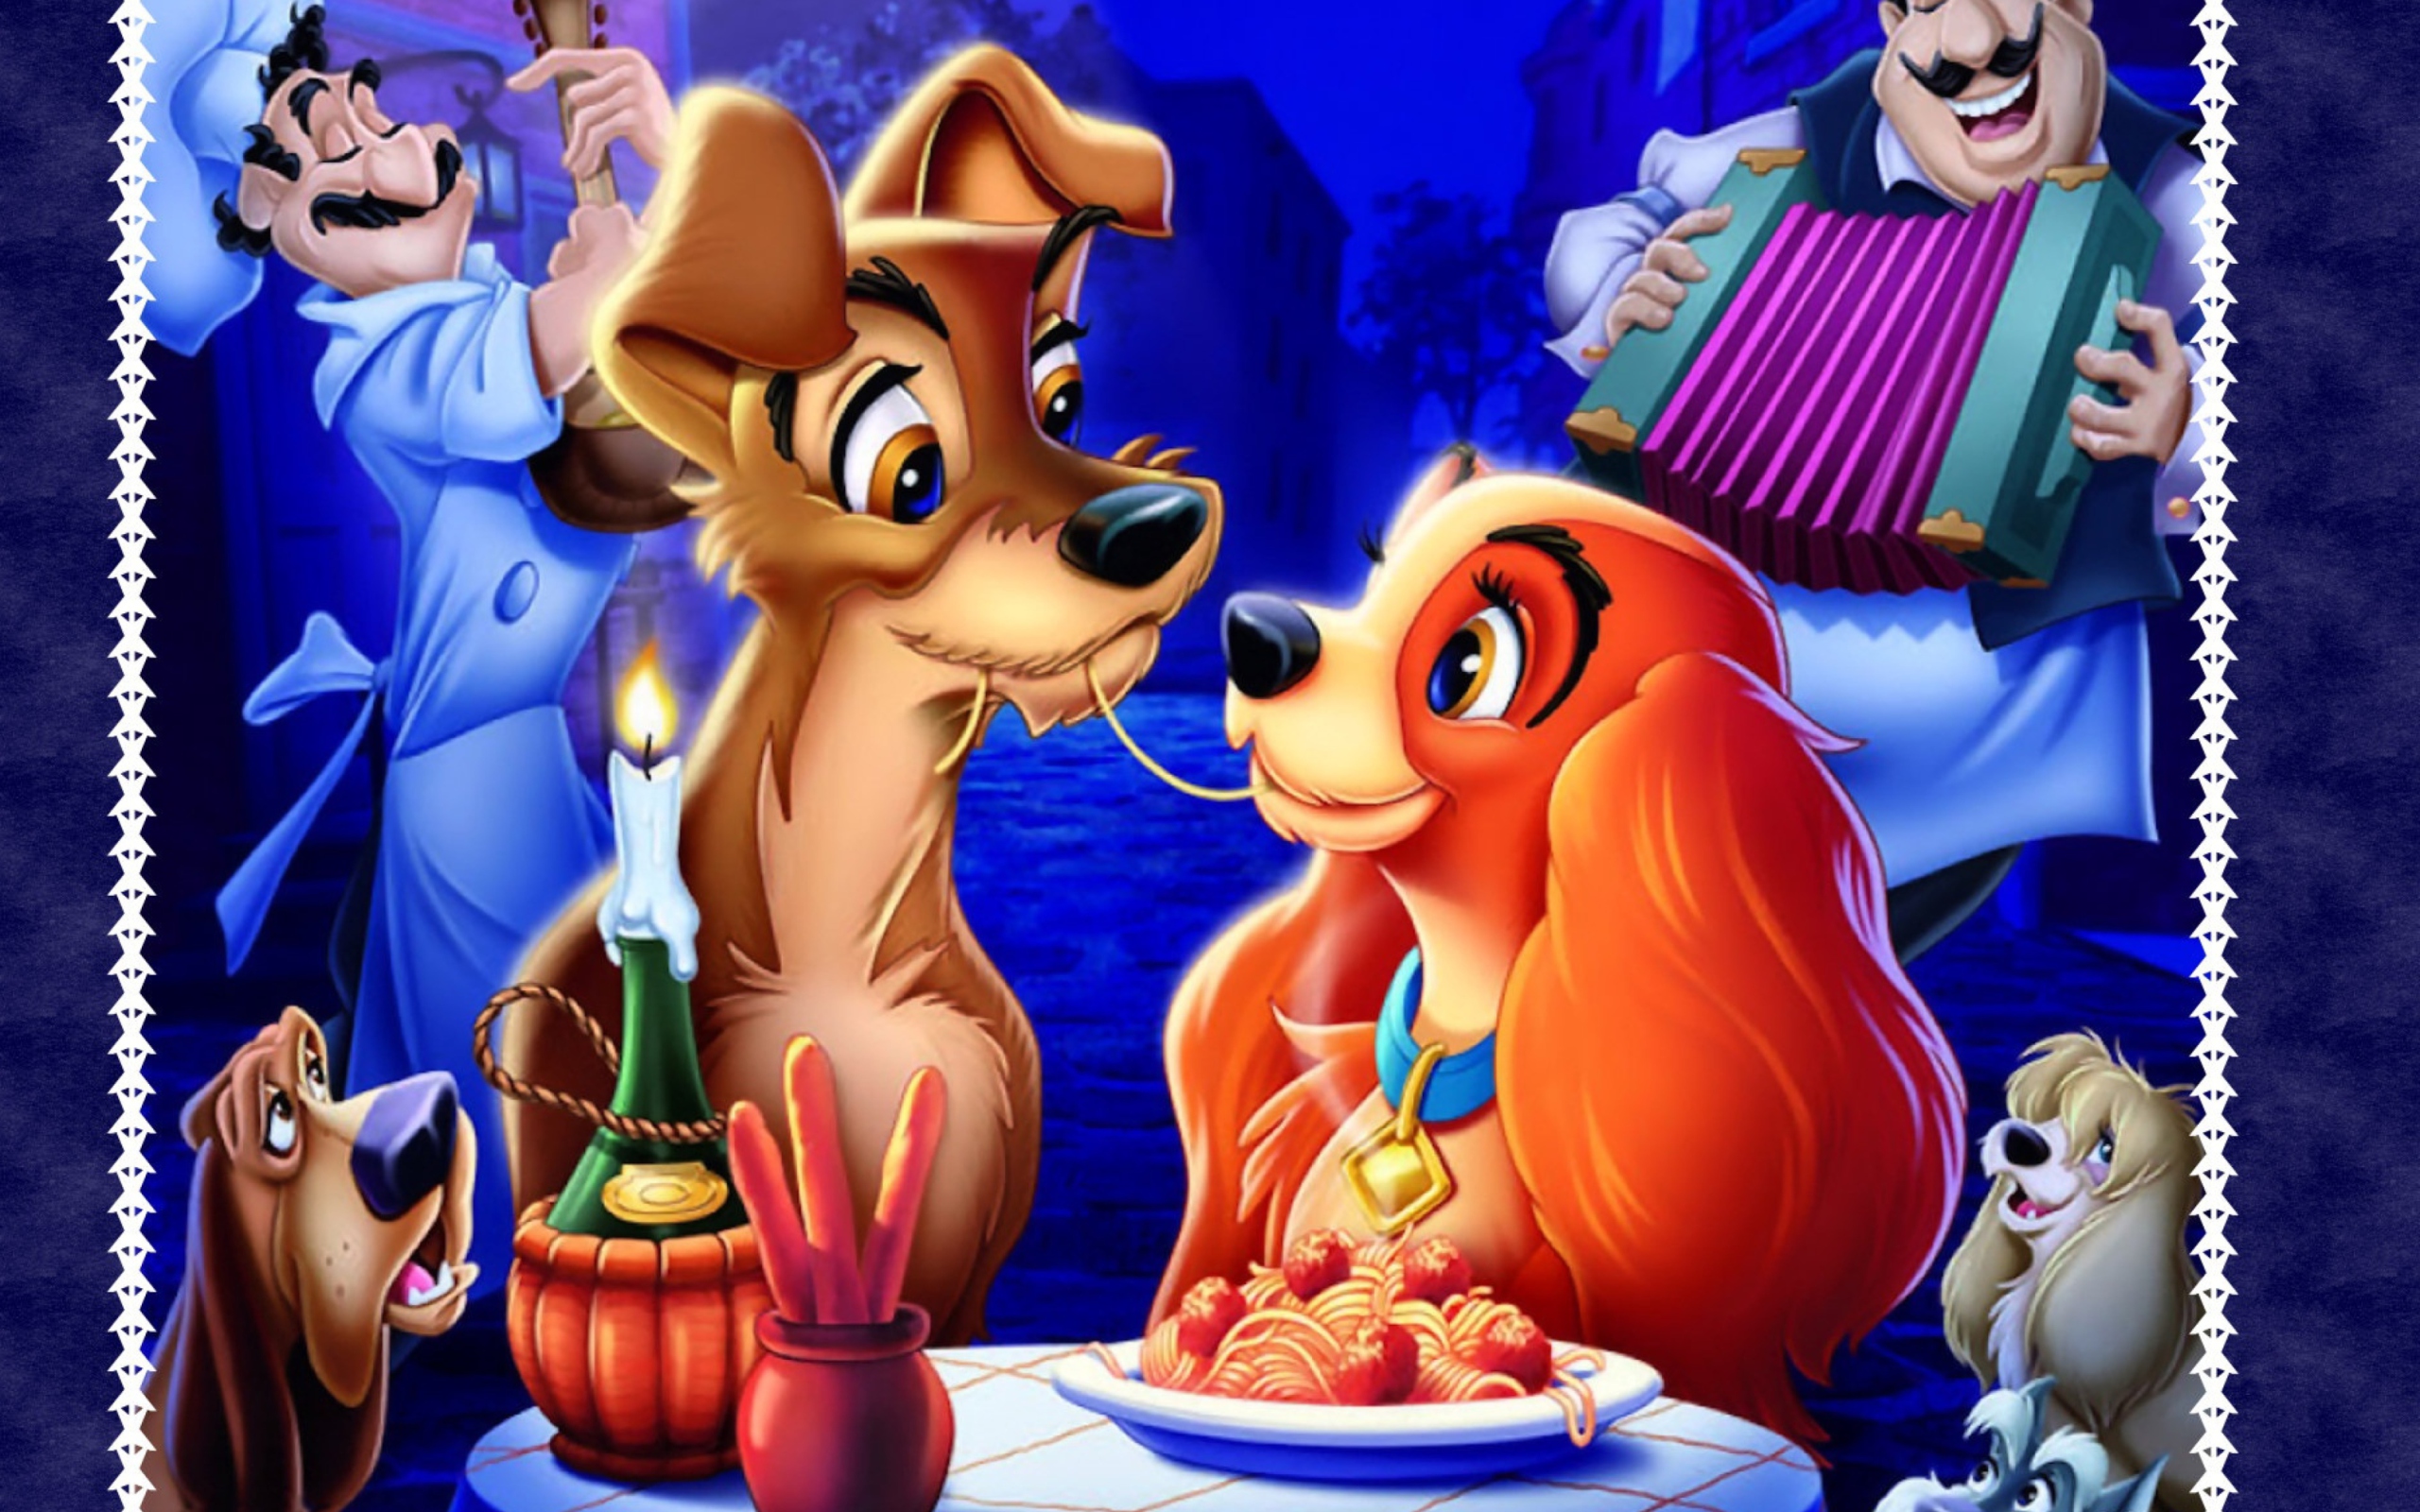 Lady And The Tramp wallpaper 2560x1600